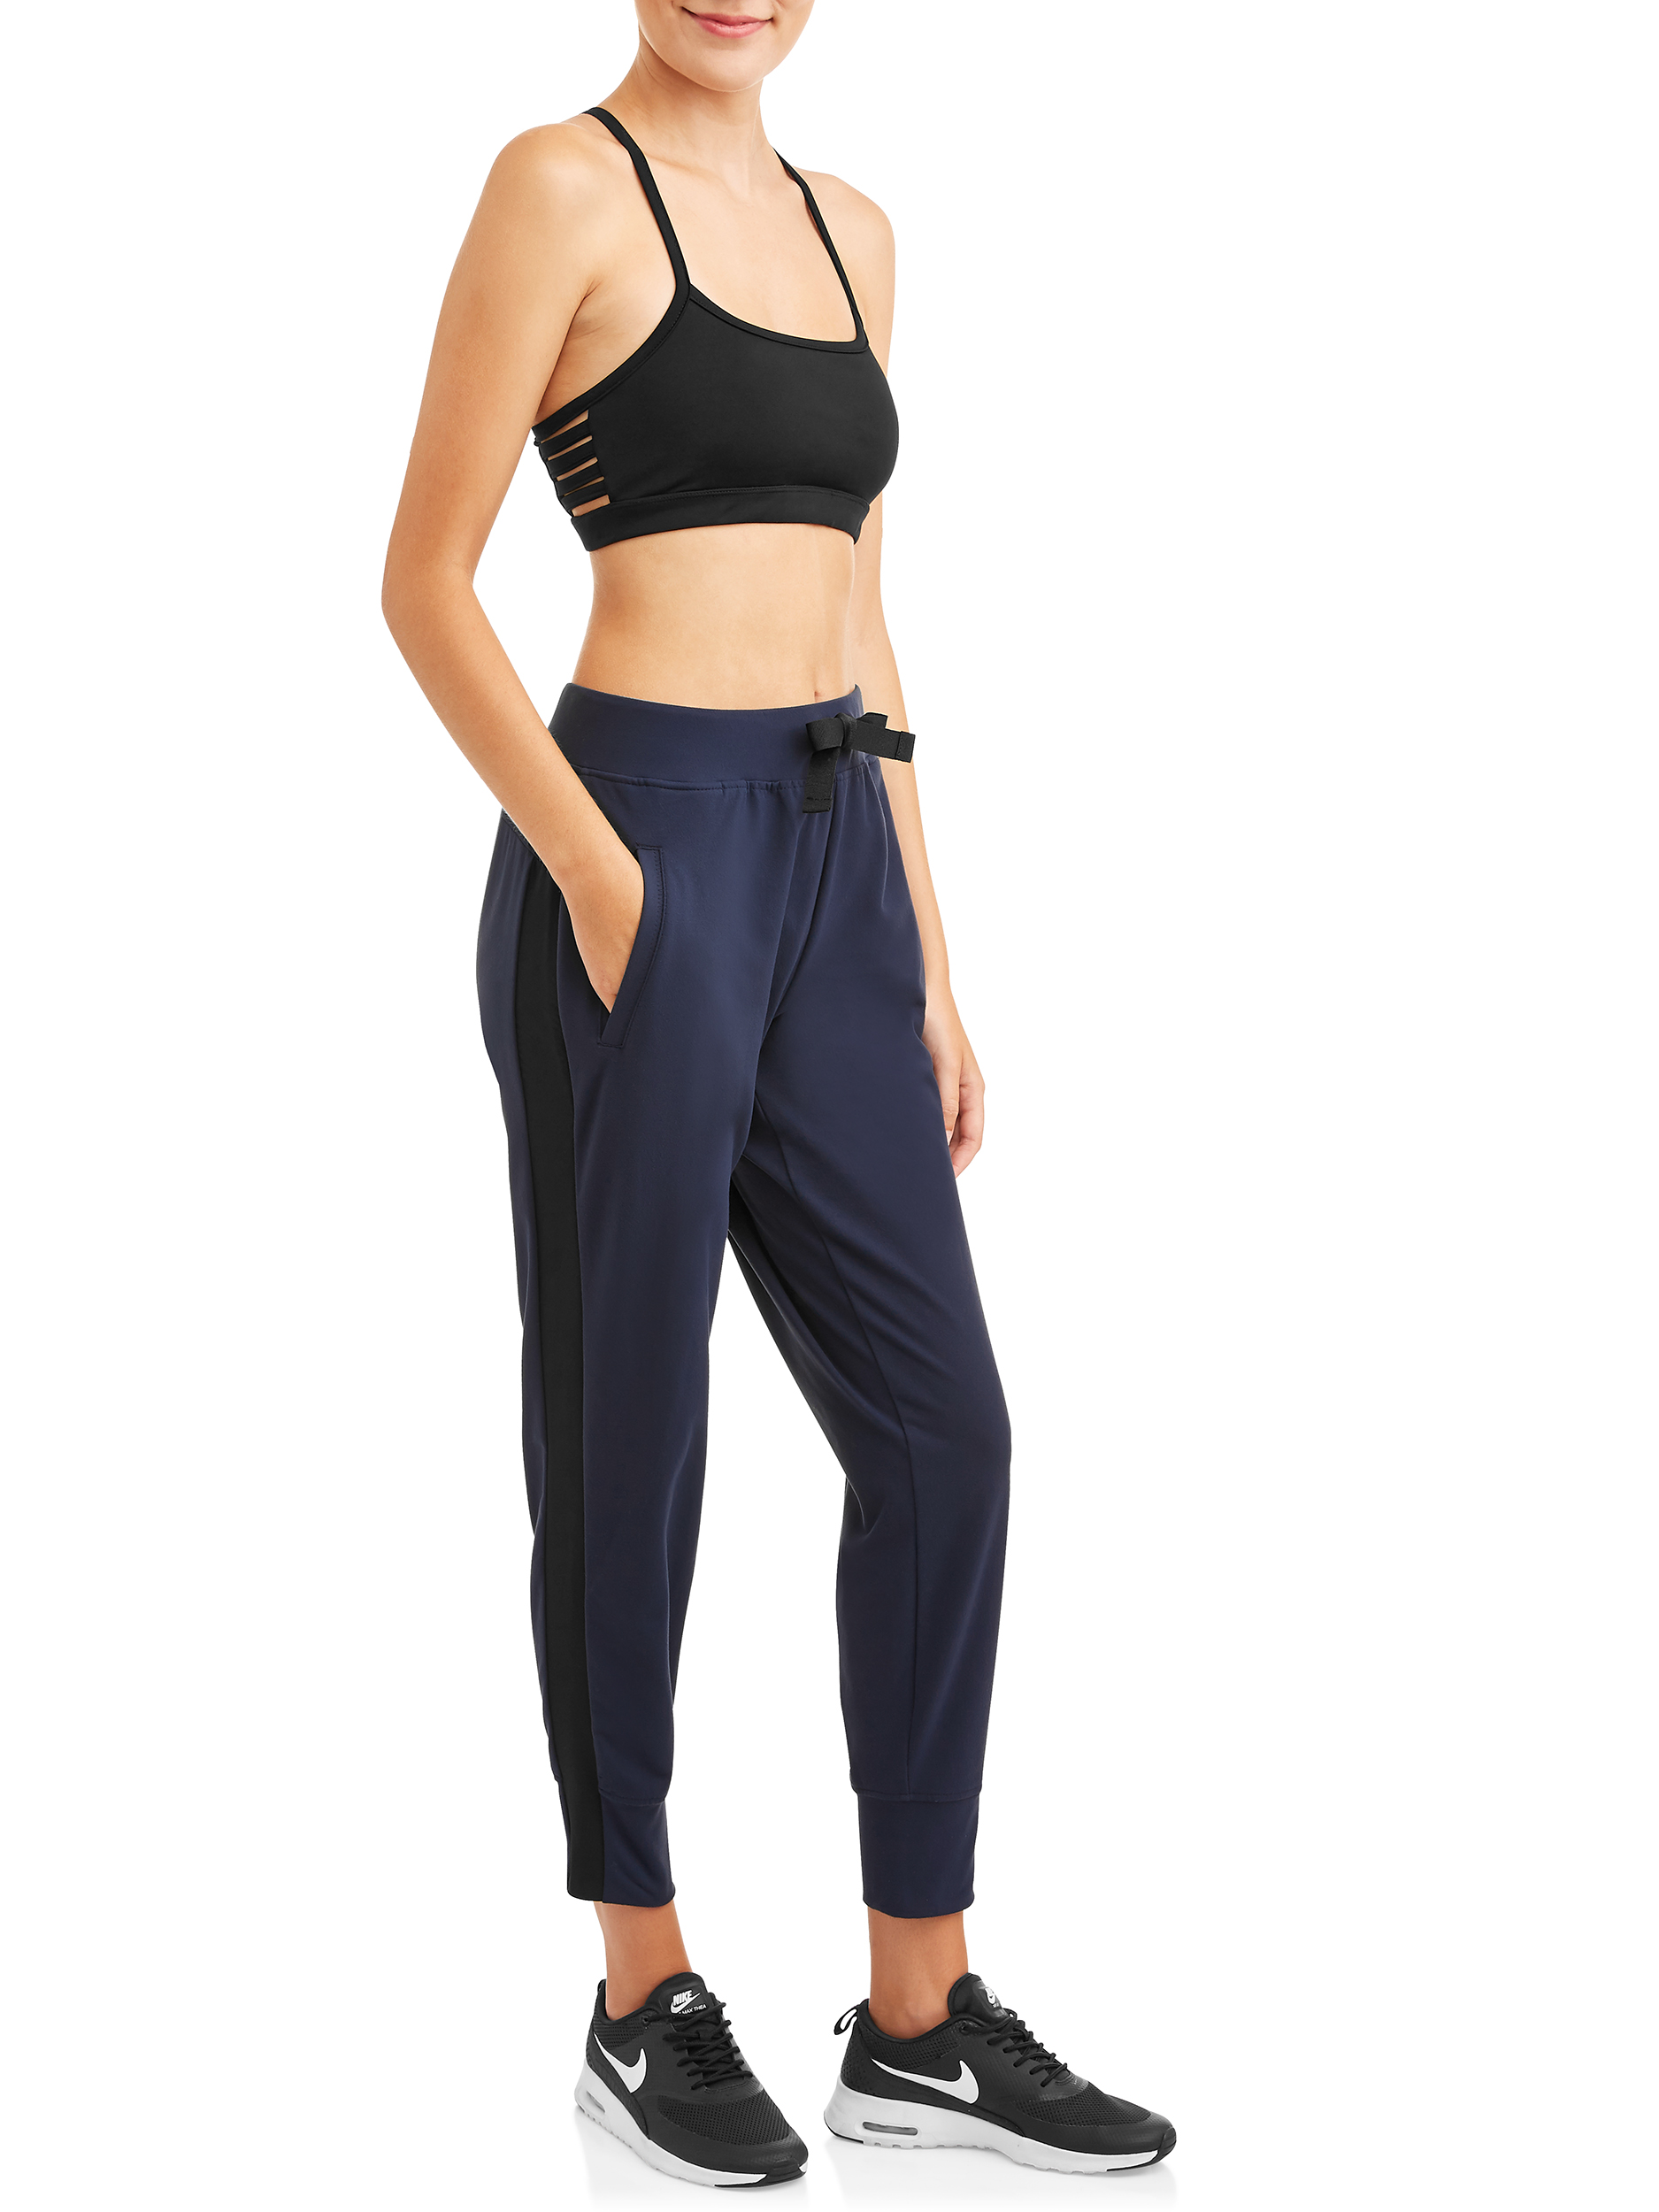 Avia Women's Athleisure Jogger Crop With Side Stripe - image 4 of 4